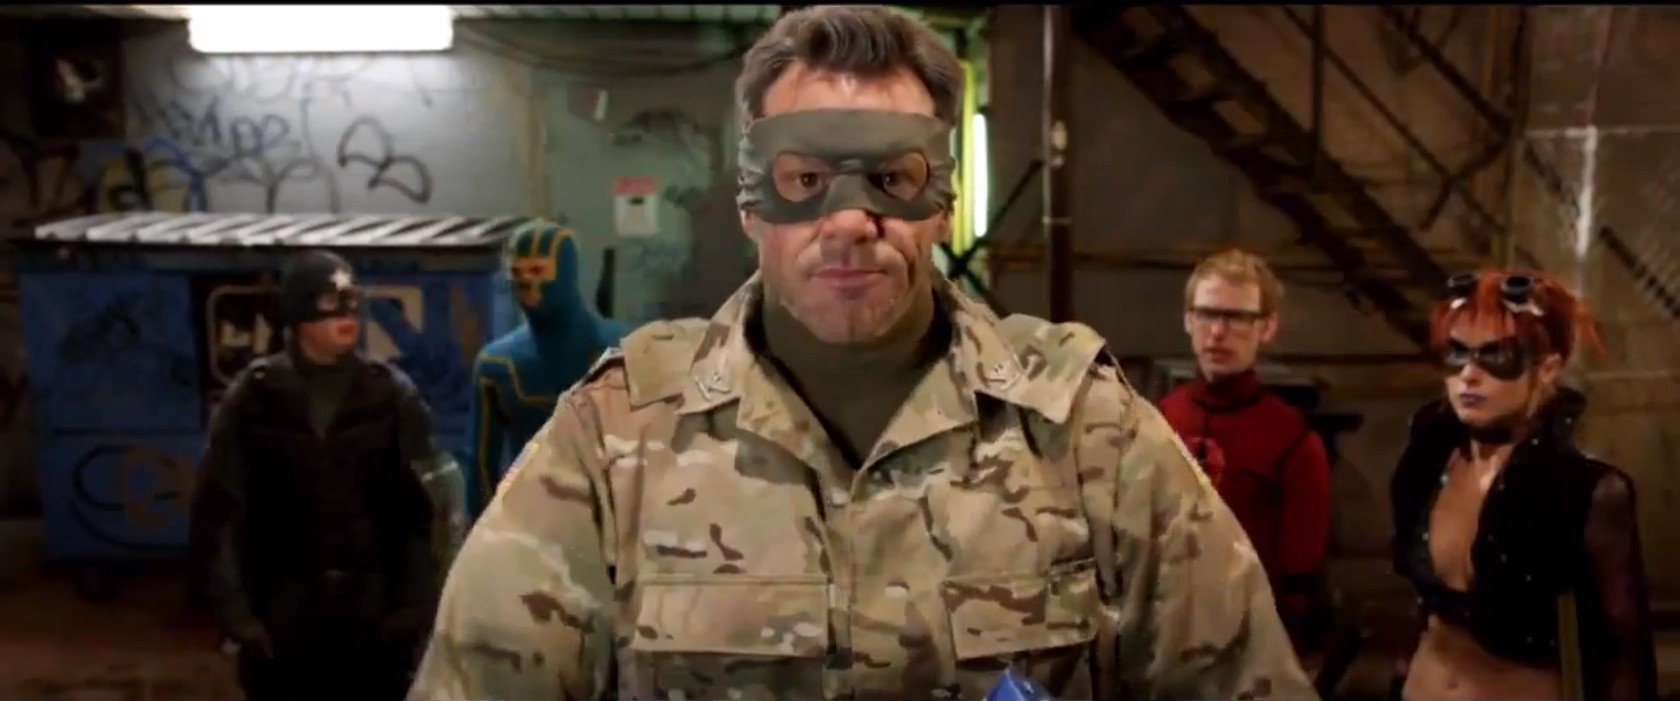 kick-ass-2-jim-carrey-as-colonel-stars-and-stripes